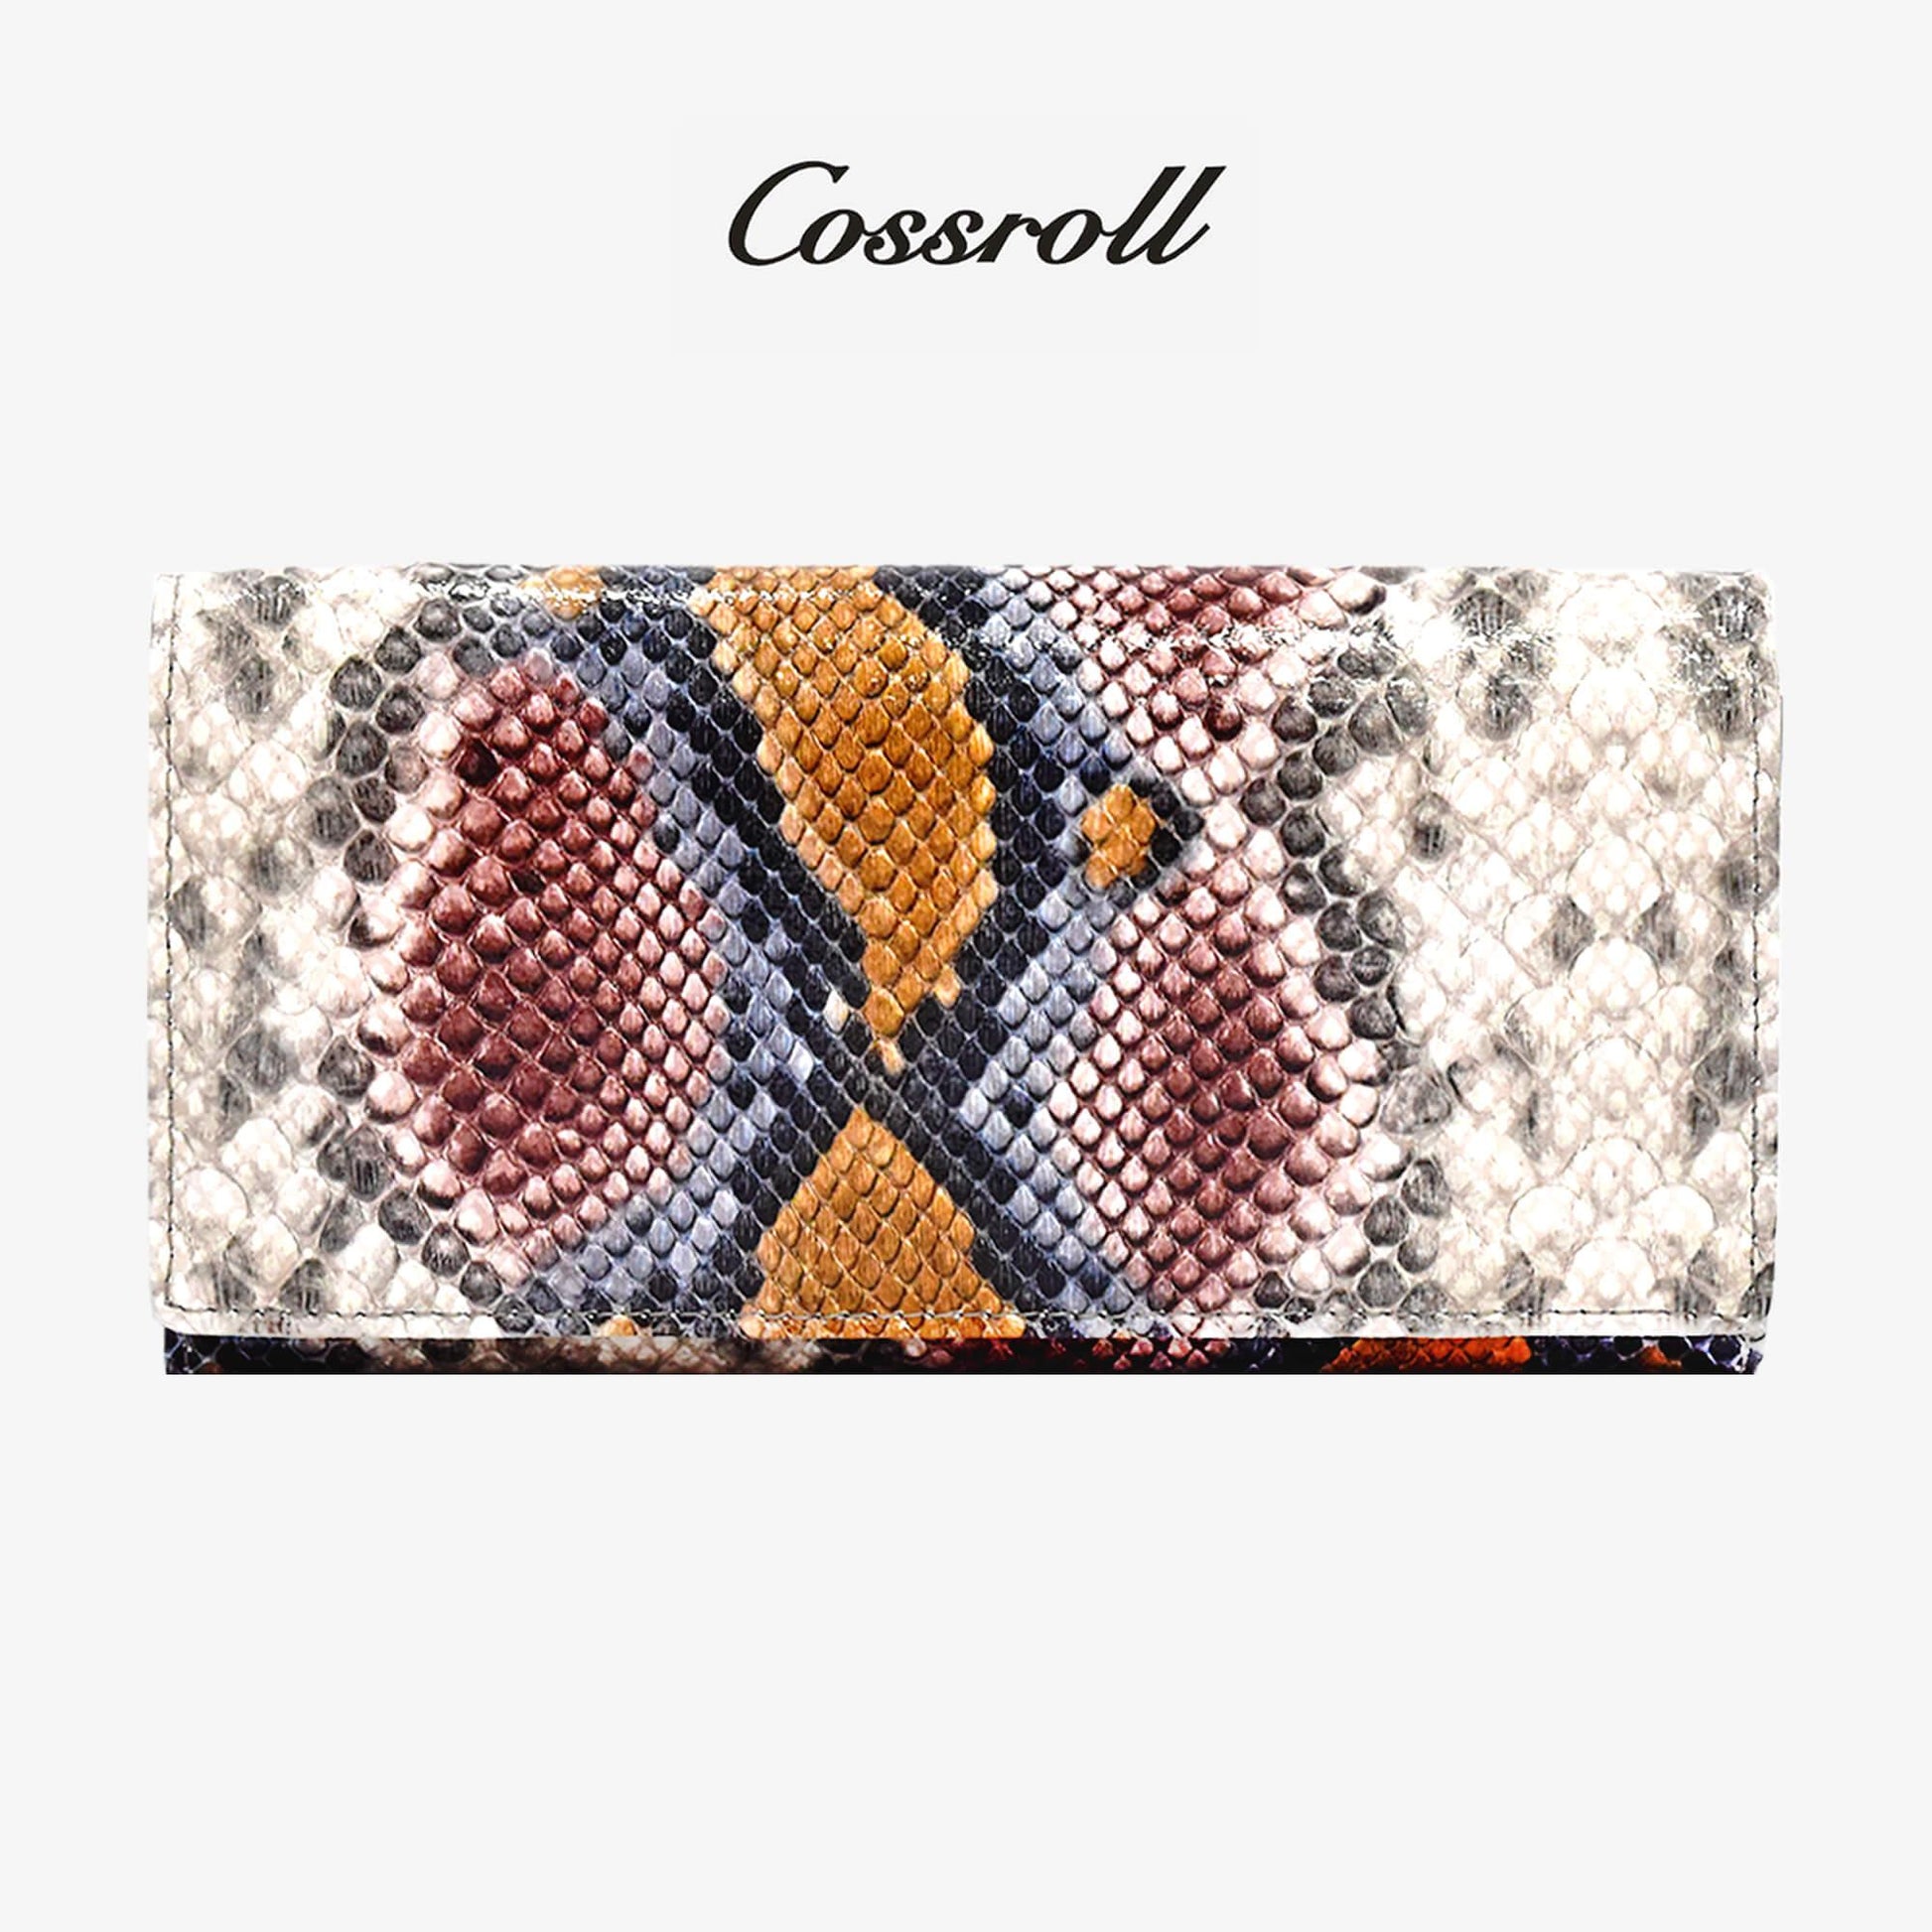  Python Print Leather Wallet Manufacturer cossroll.leather